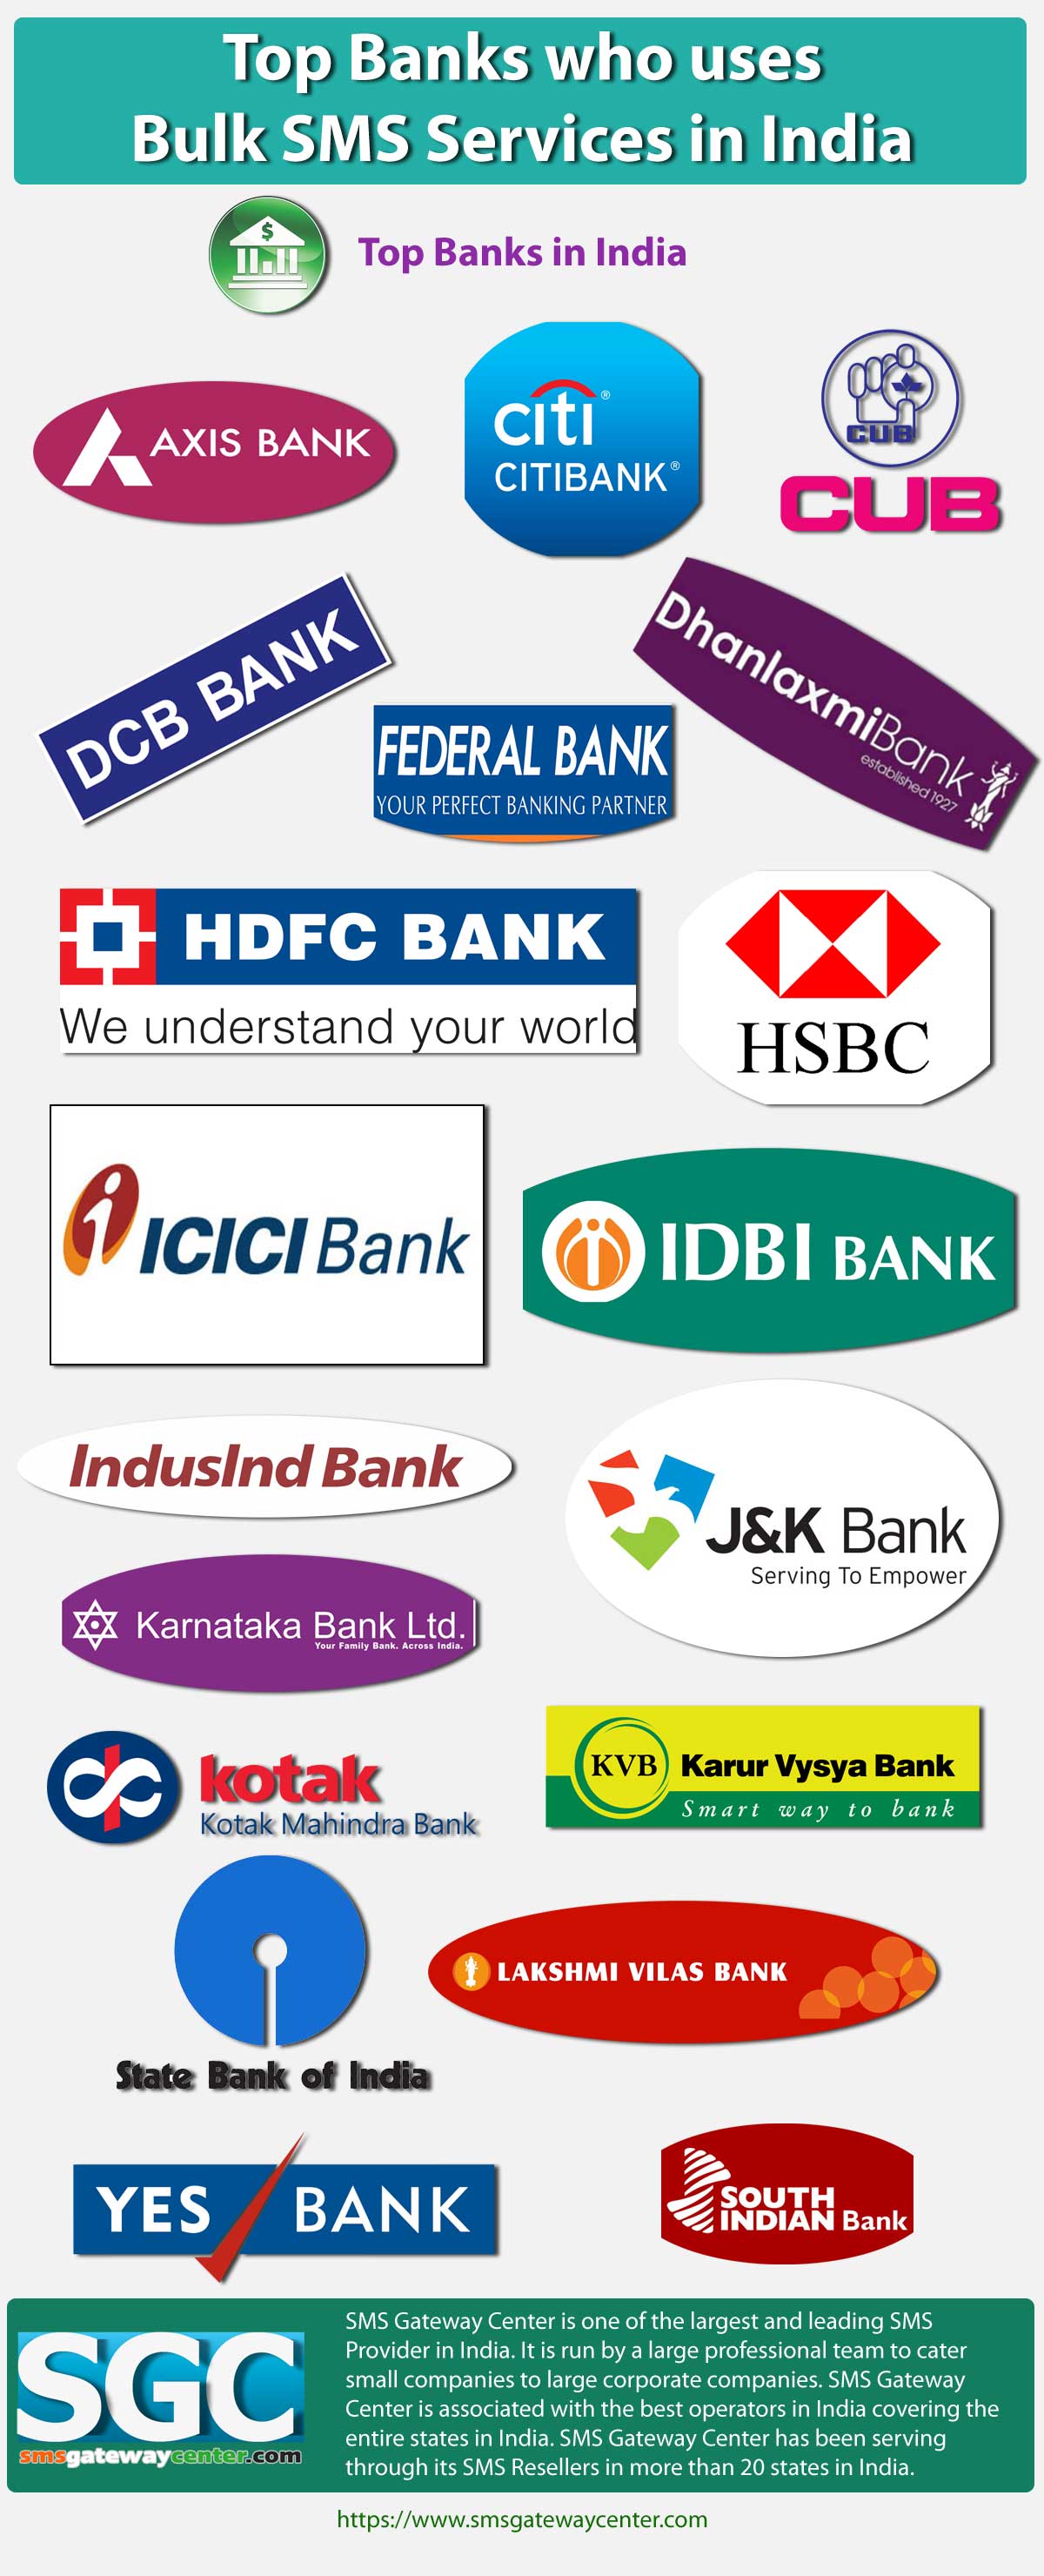 Top Banks using Bulk SMS in India